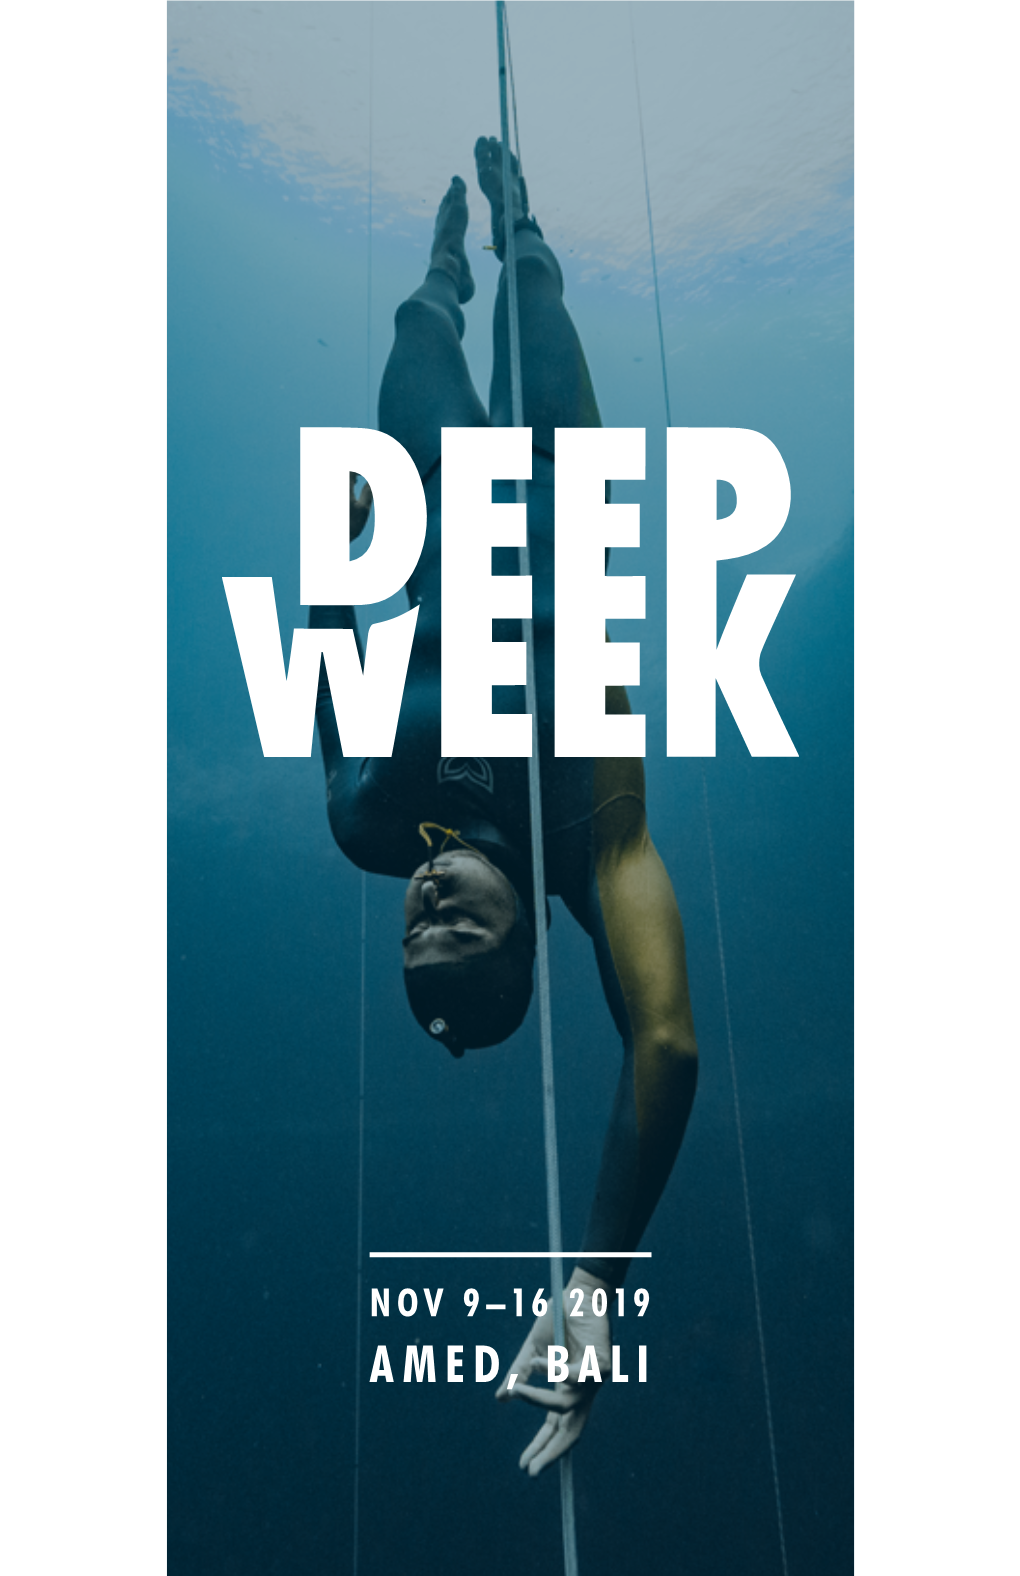 Amed, Bali Improve Your Freediving with Aussie Record Holder, Adam Stern and World-Record Holder, William Trubridge